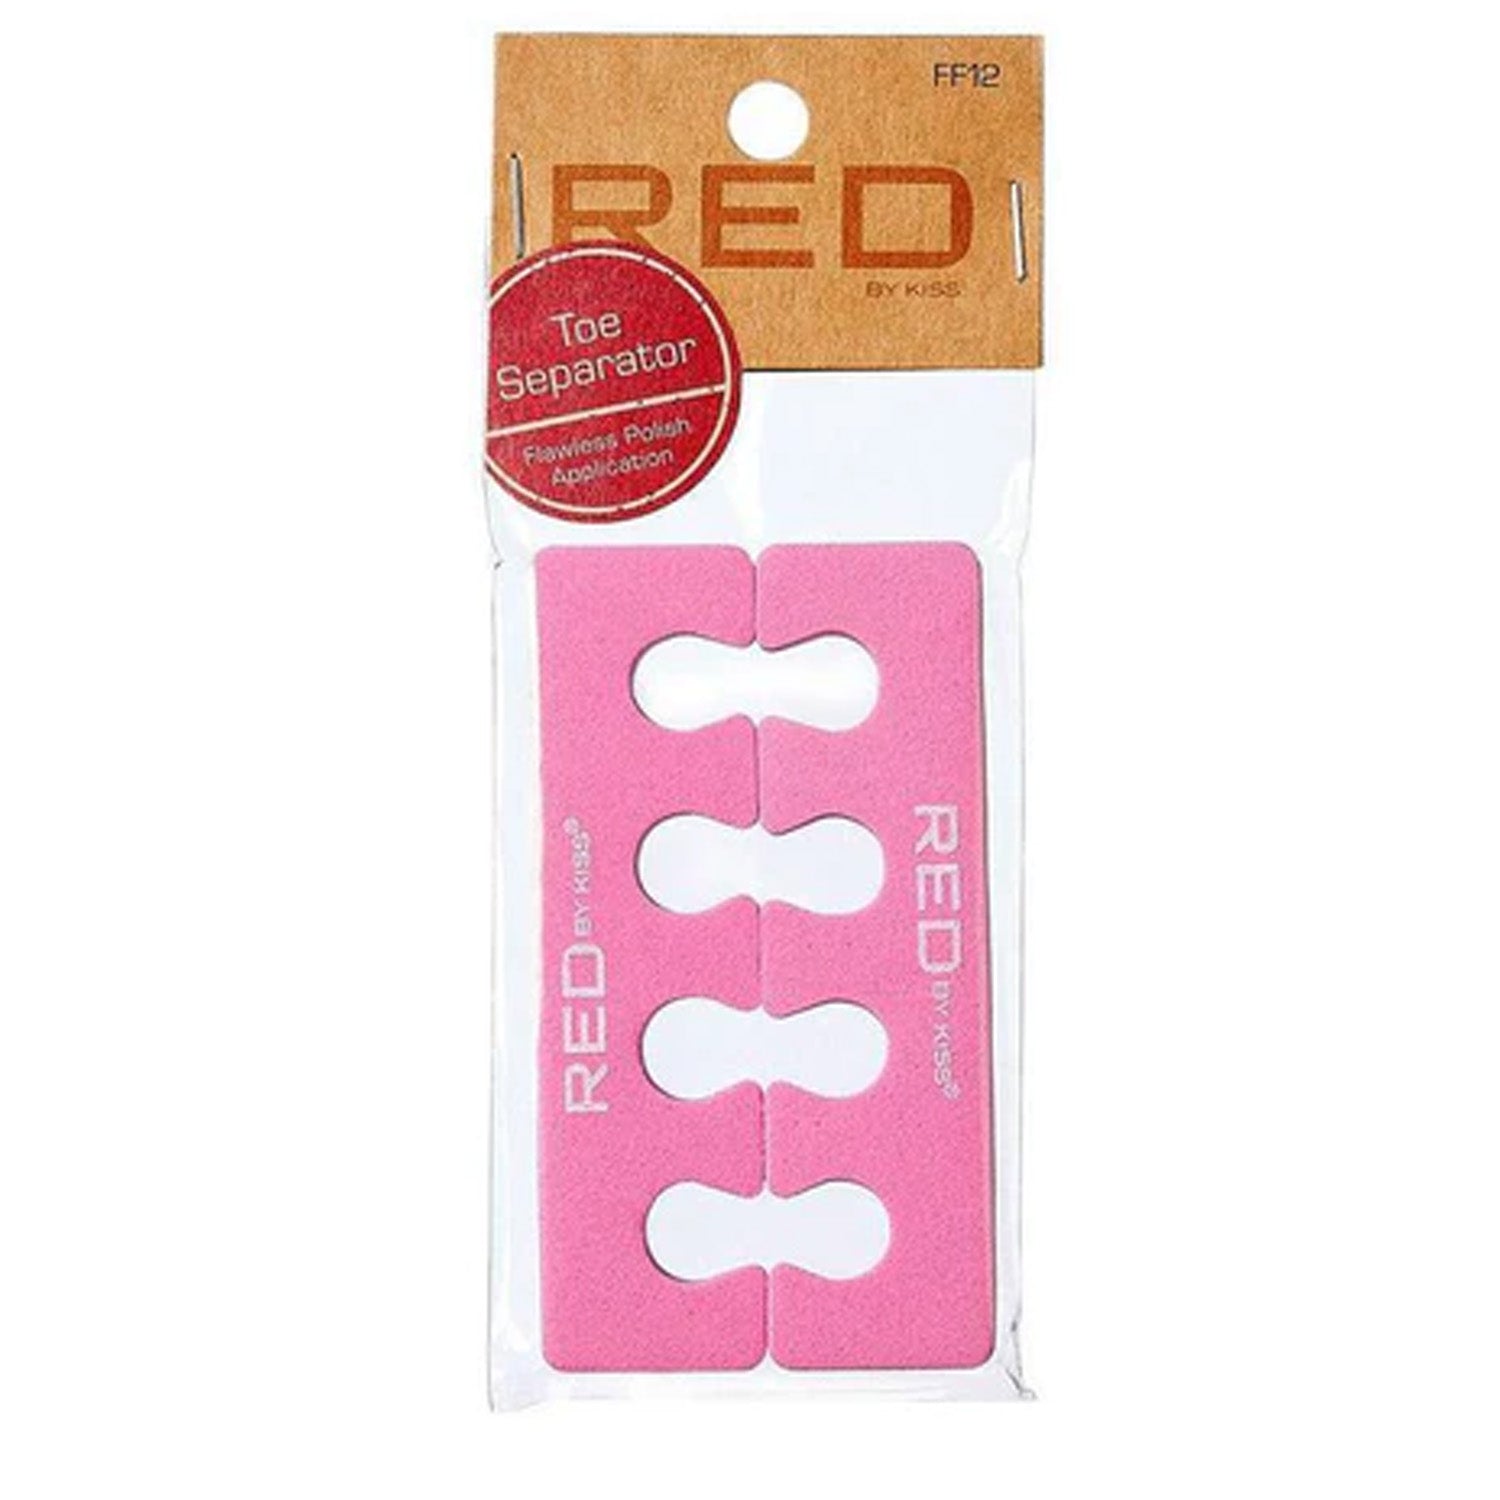 RED BY KISS PEDICURE TOE SEPARATOR PINK/WHITE FF12